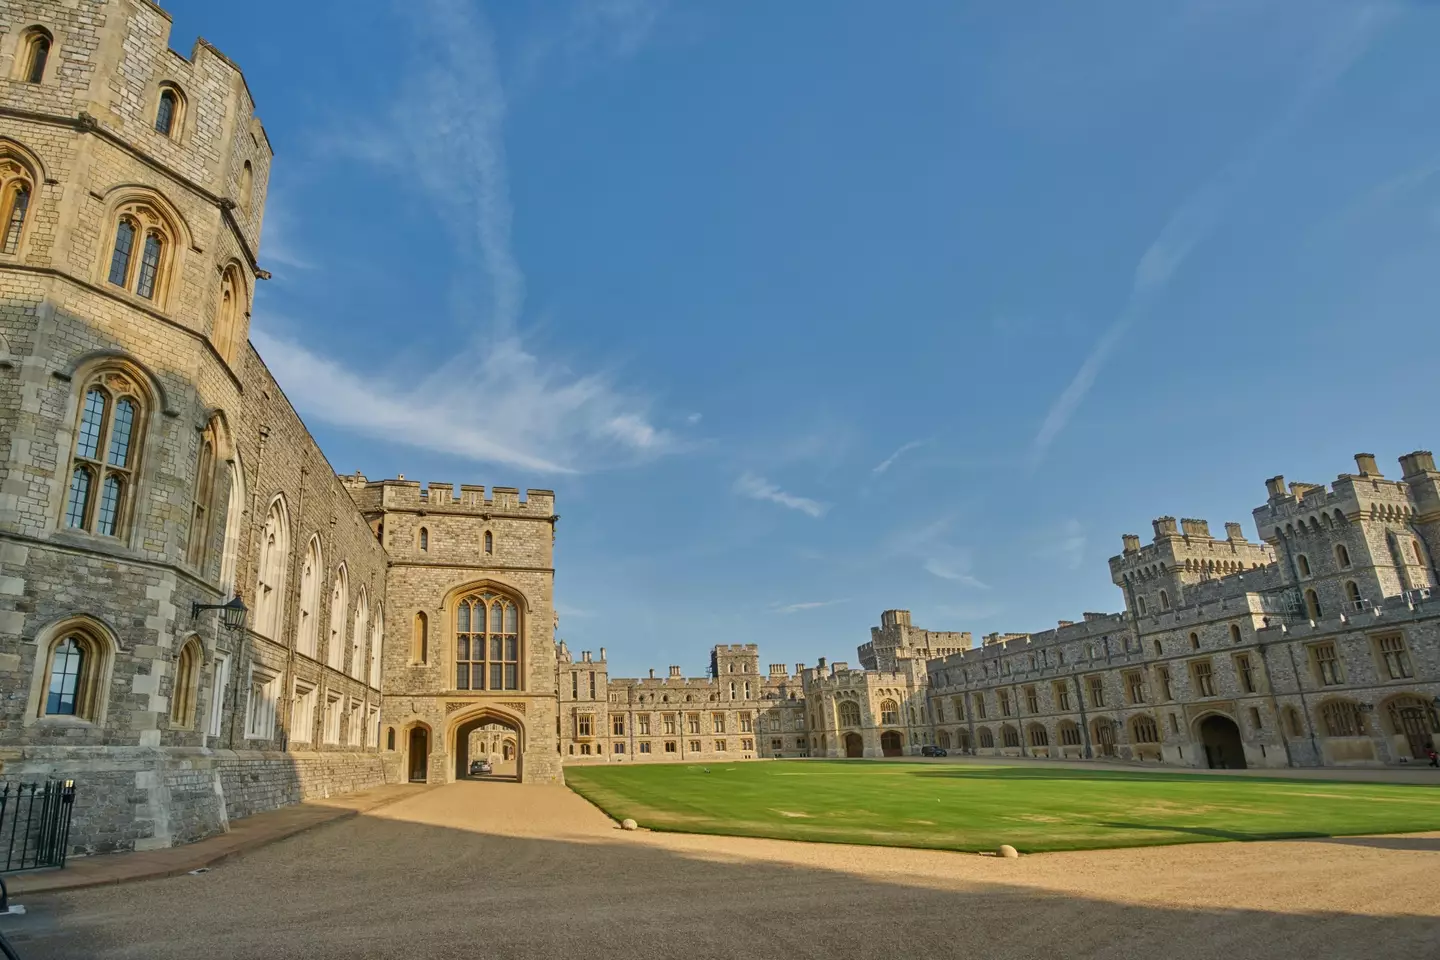 Jaswant Singh Chail was arrested while carrying a crossbow on Christmas Day at Windsor Castle.